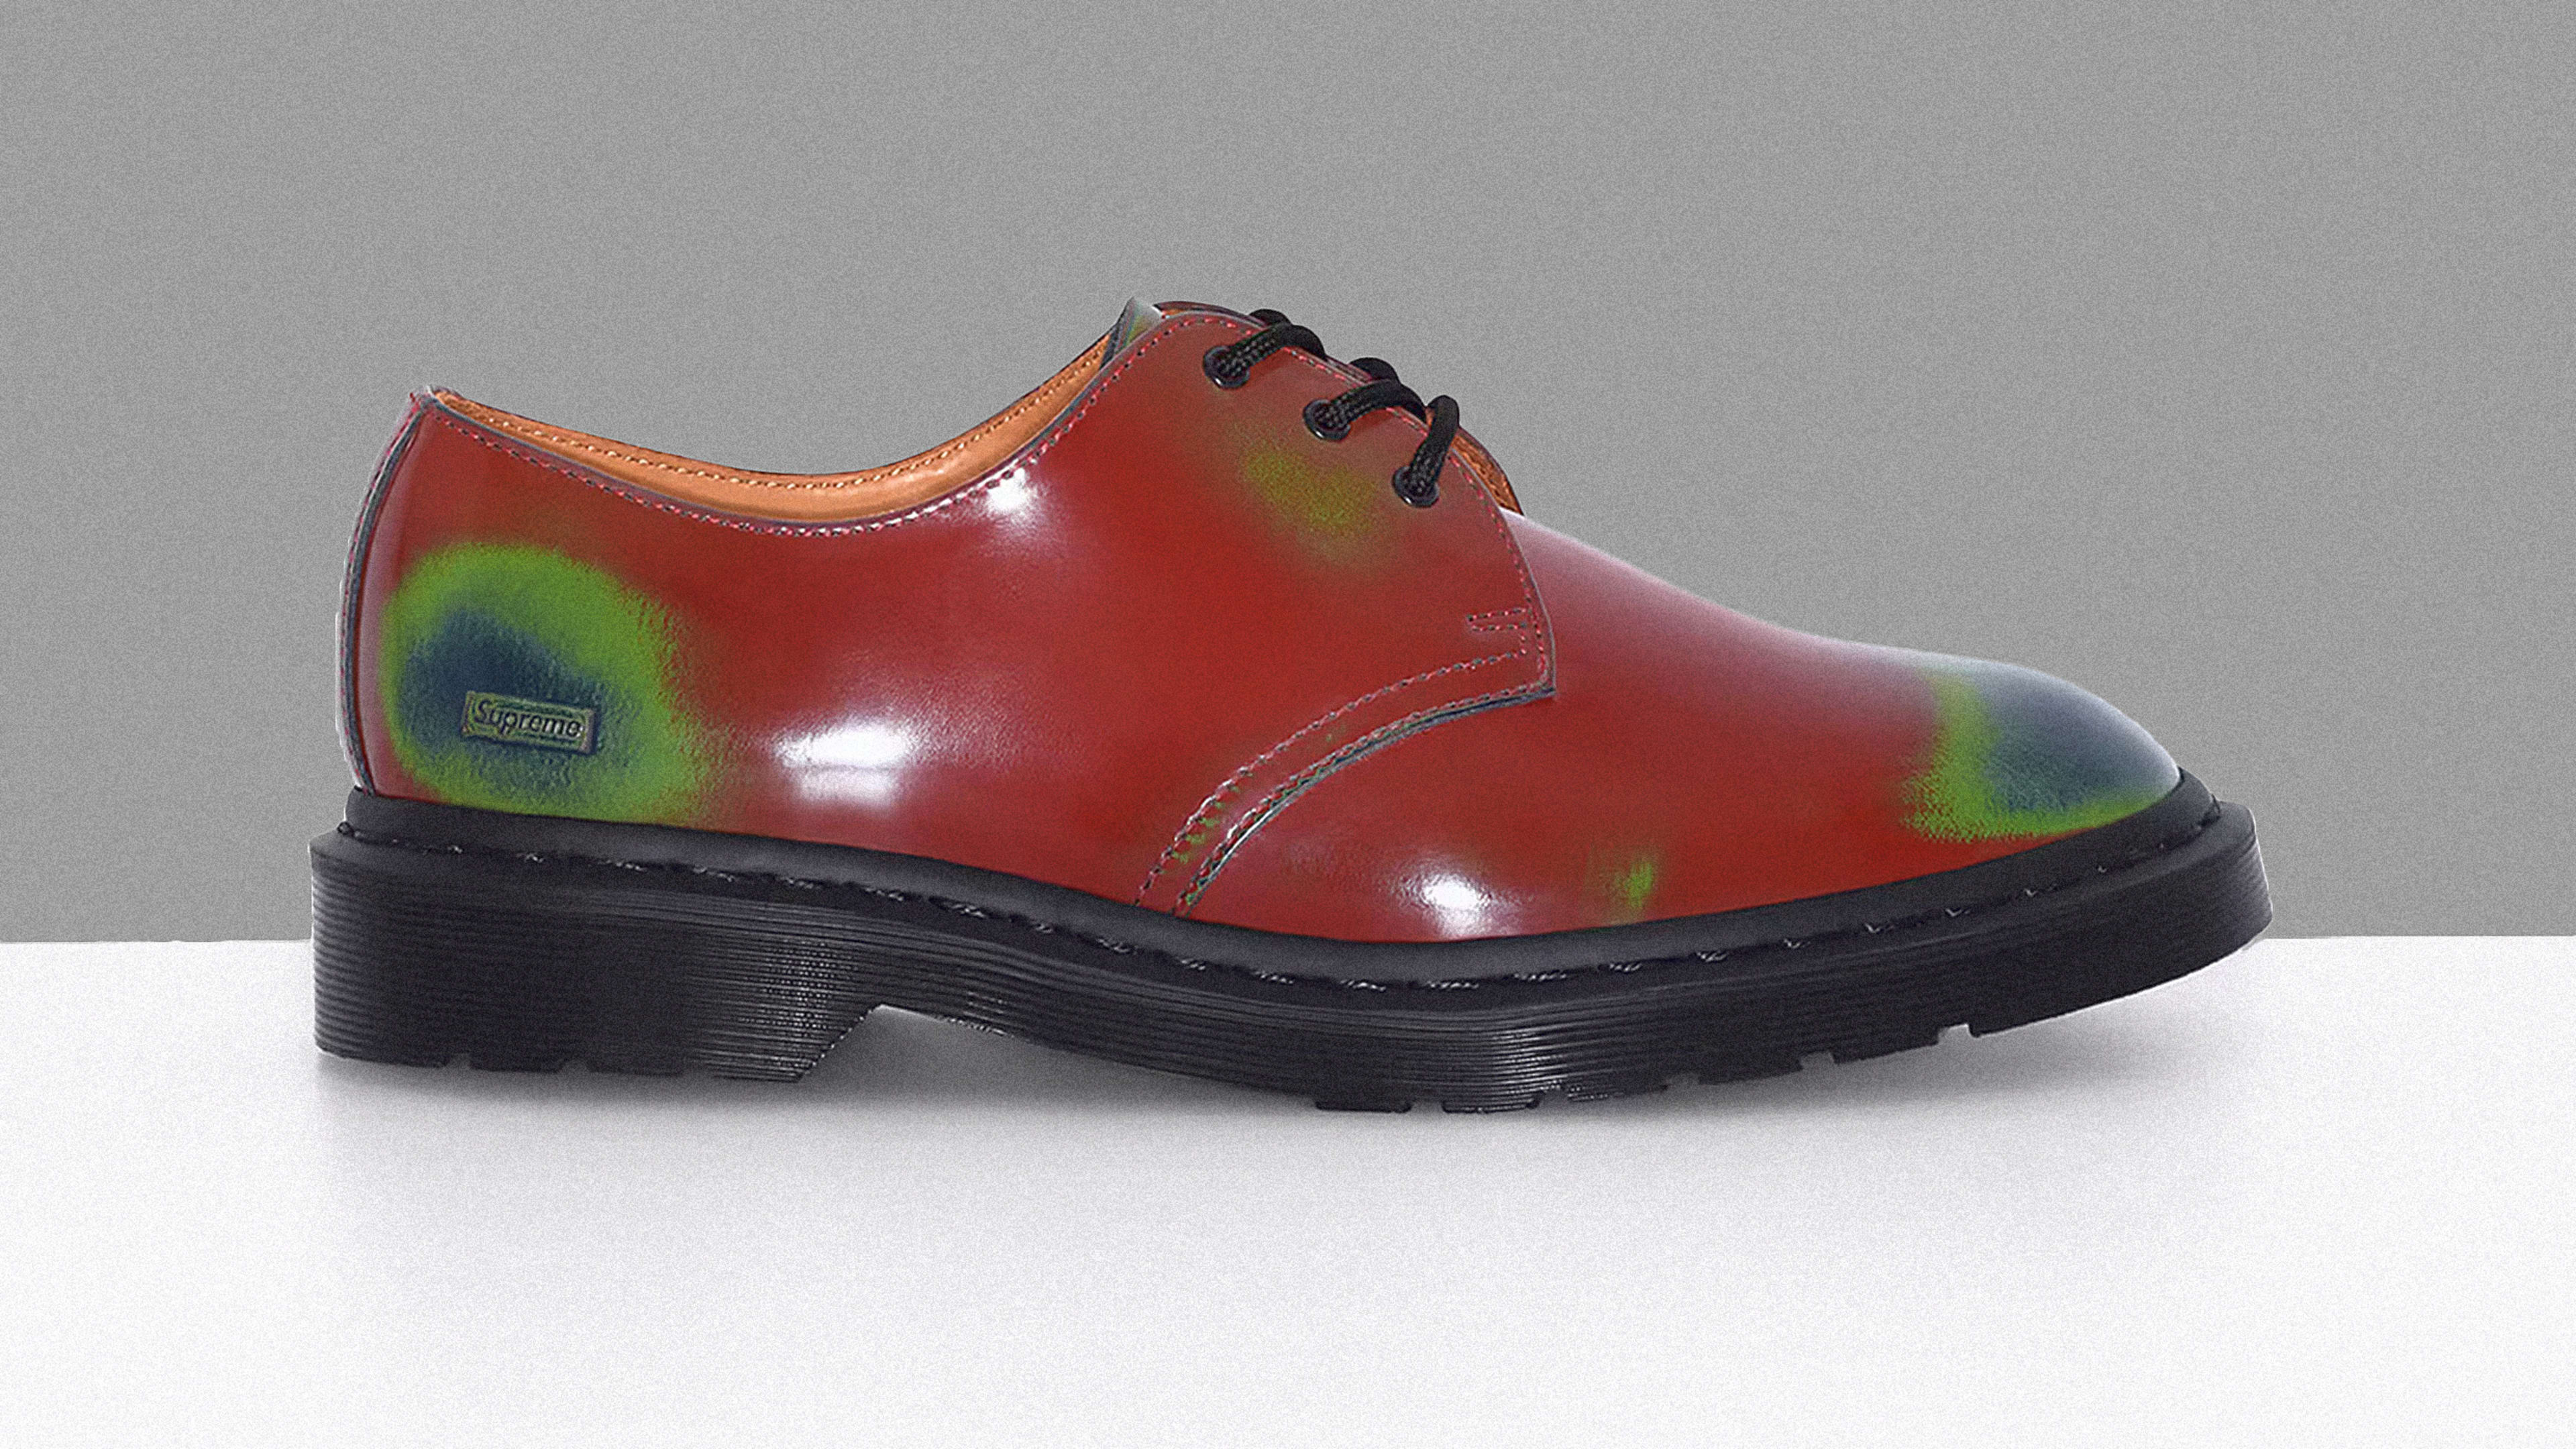 Dr. Martens collaborated with Supreme on a color-changing shoe